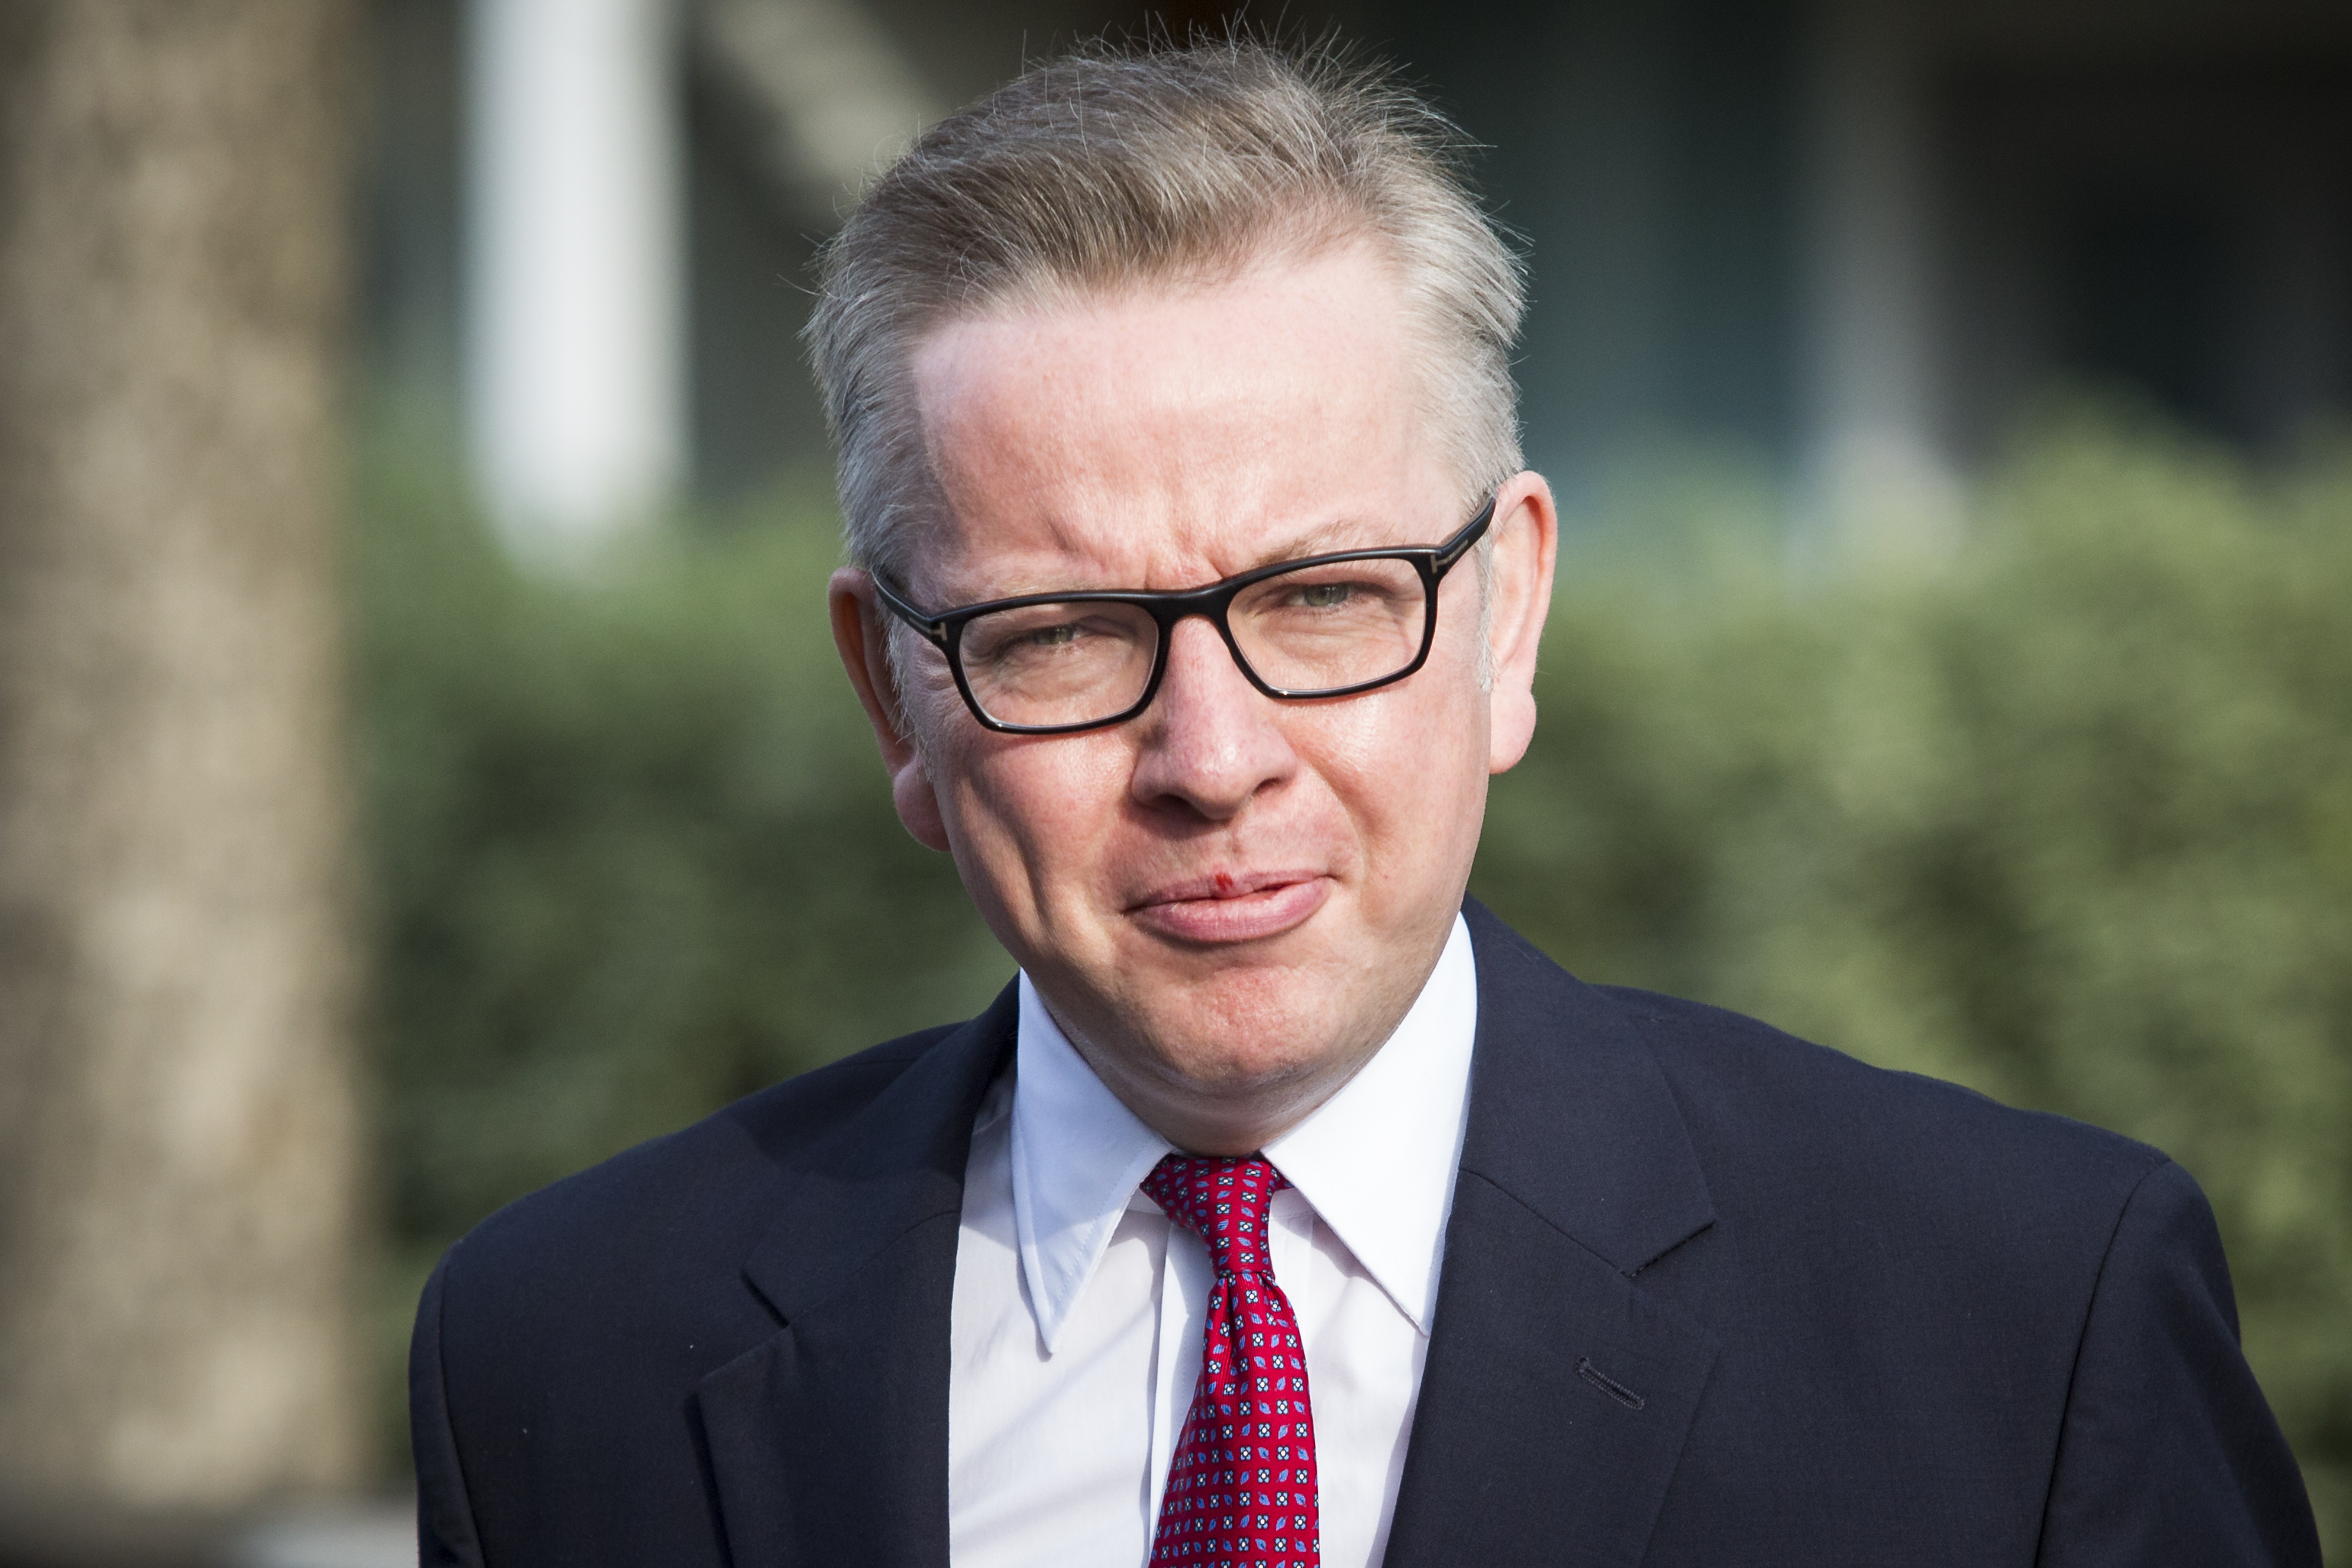 Justice Secretary and leading Brexit campaigner Michael Gove leaves his home in Kensington before announcing his intention to run to be the next Conservative Party leader and UK prime minister on June 30, 2016 in London, England. (Jack Taylor—Getty Images)